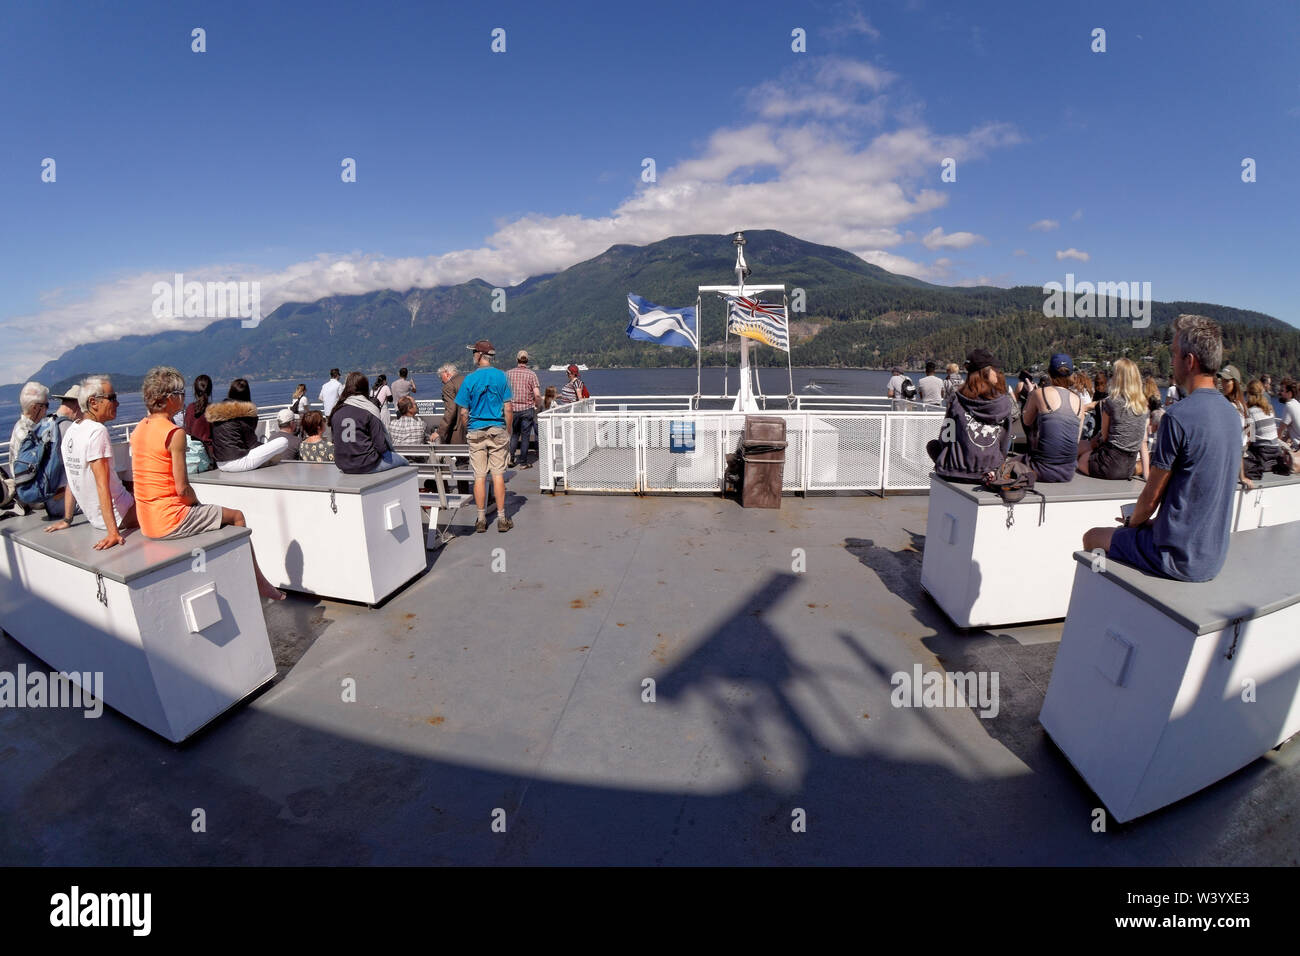 Wide angle view of passengers enjoying the view from the upper deck of the Bowen Island ferry, British Columbia, Canada Stock Photo